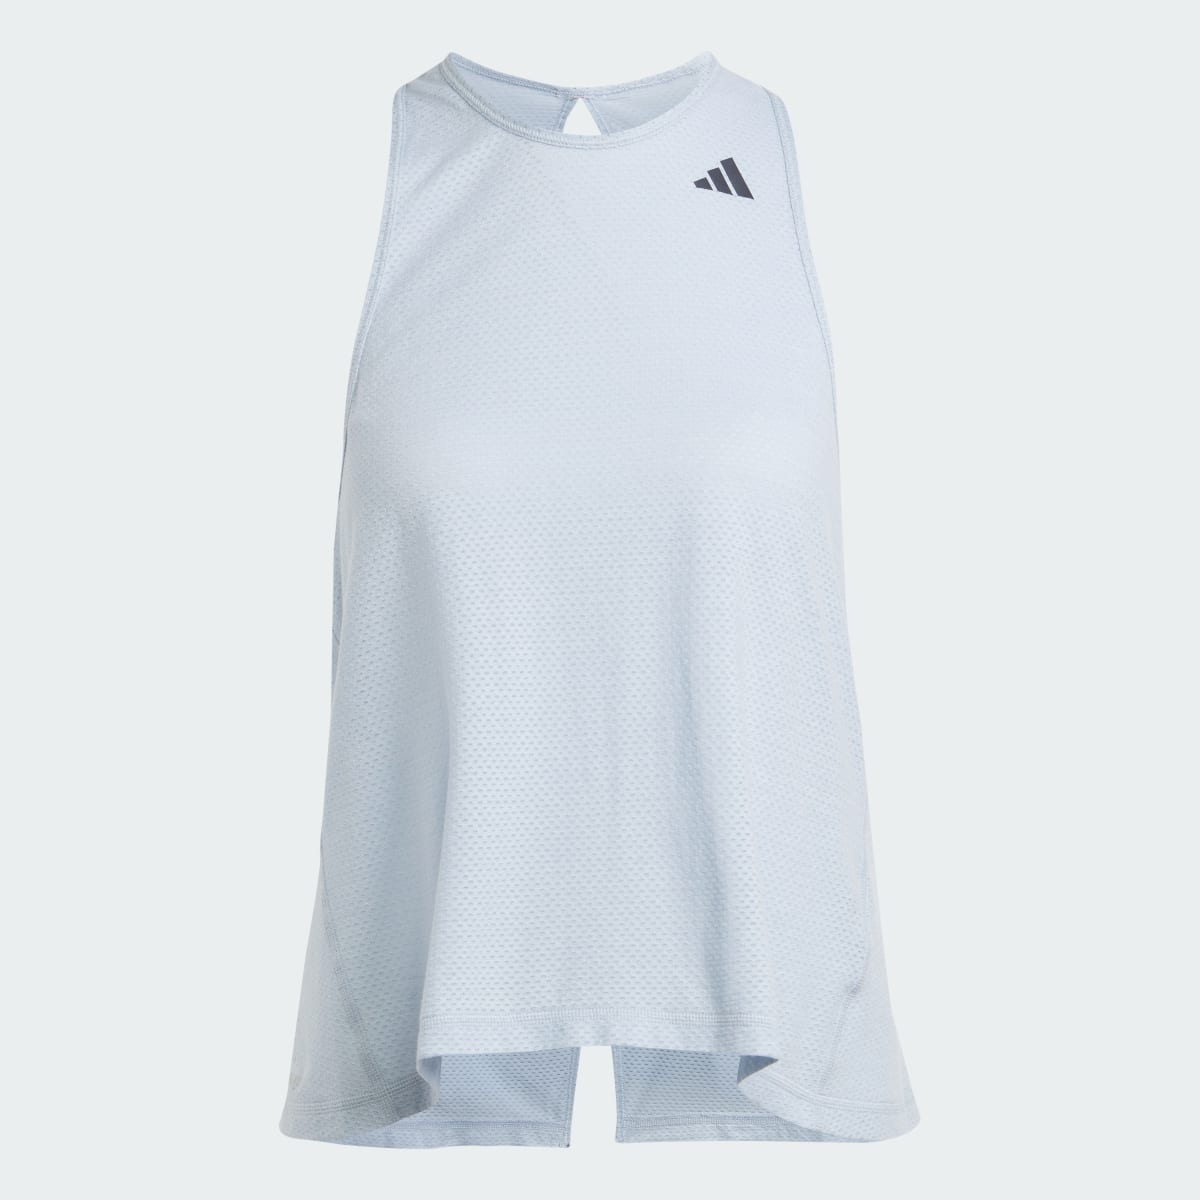 Adidas Run Icons Made with Nature Running Tank Top. 6